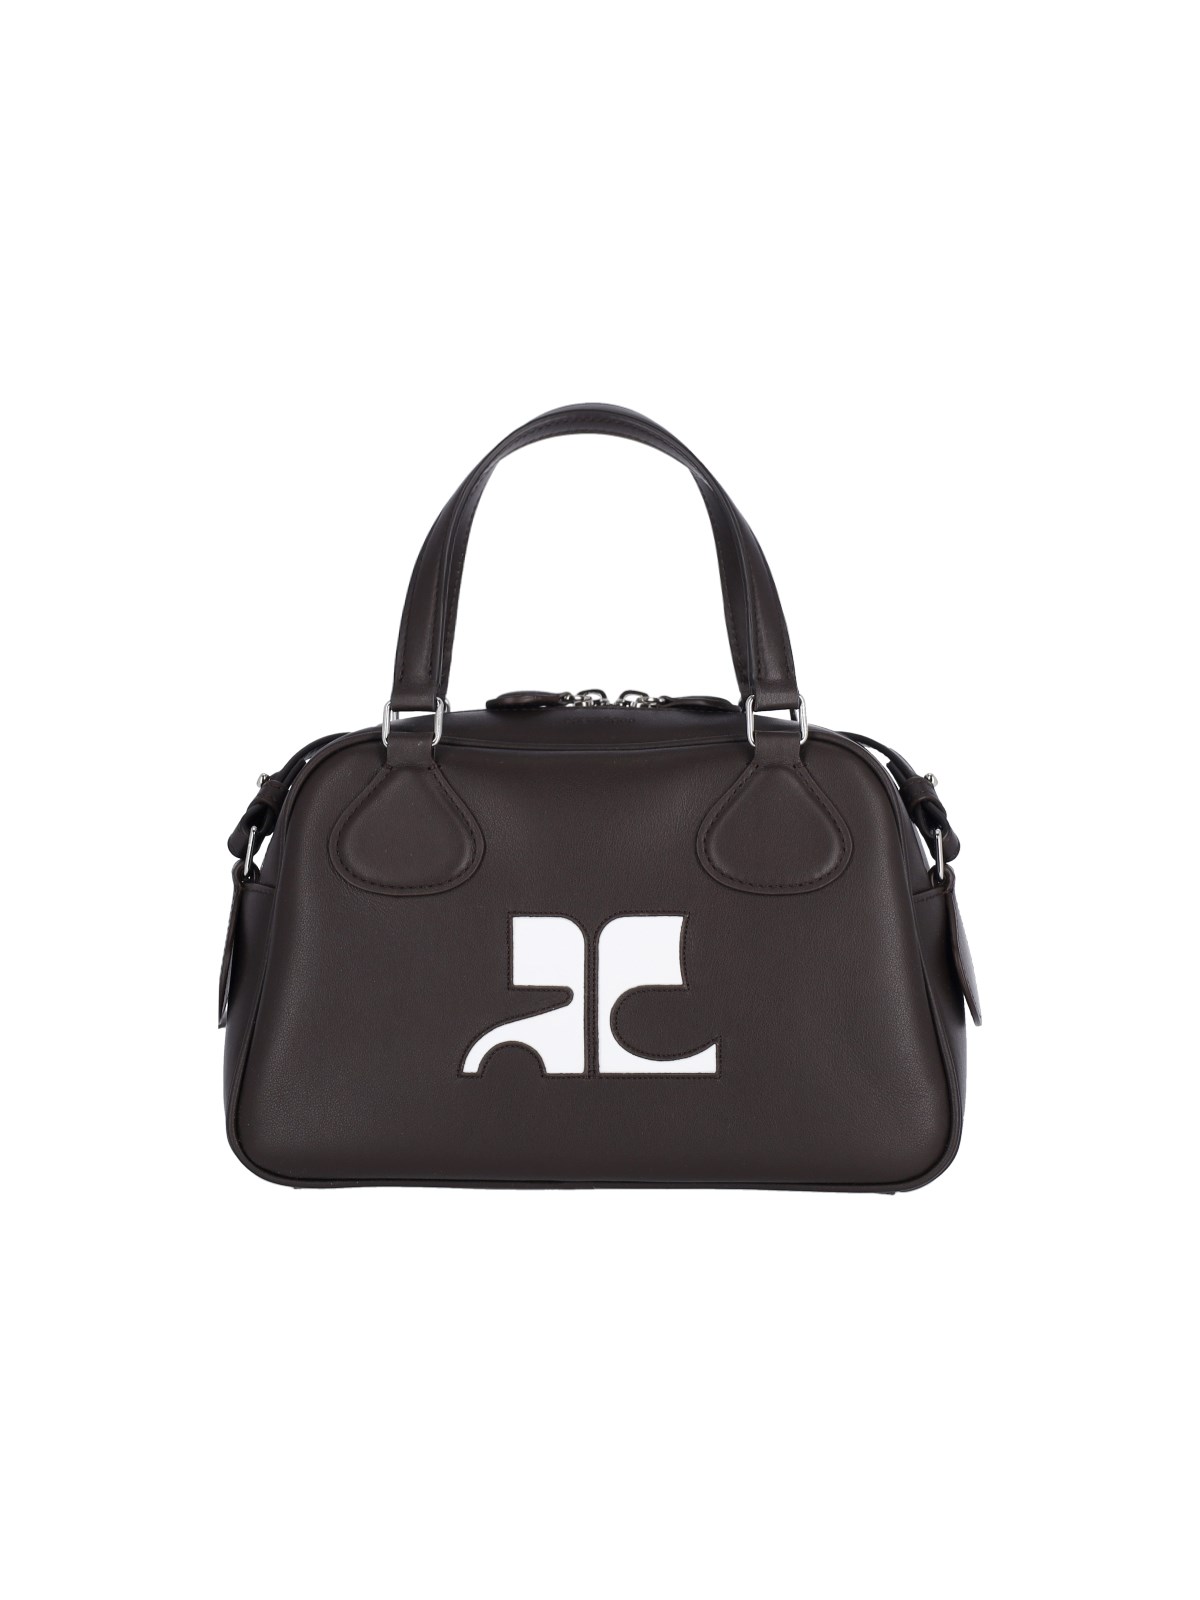 Courrèges "re-edition" Bowling Bag In Brown